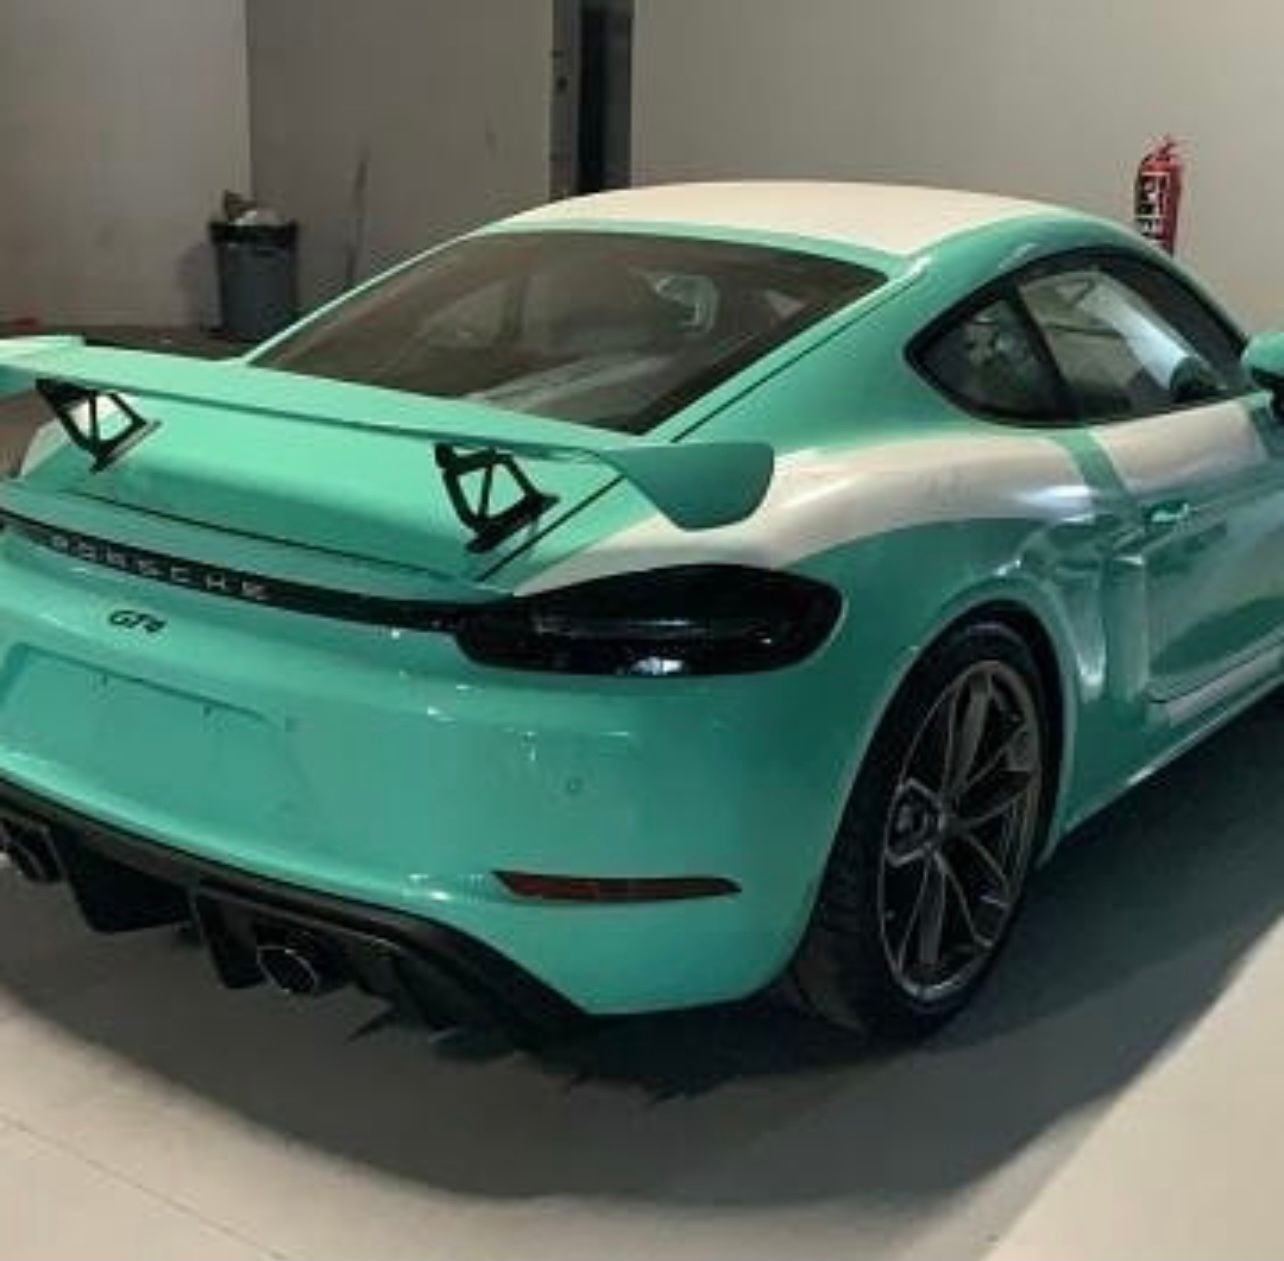 The Official PTS Color Thread - Page 10 - Rennlist - Porsche Discussion ...